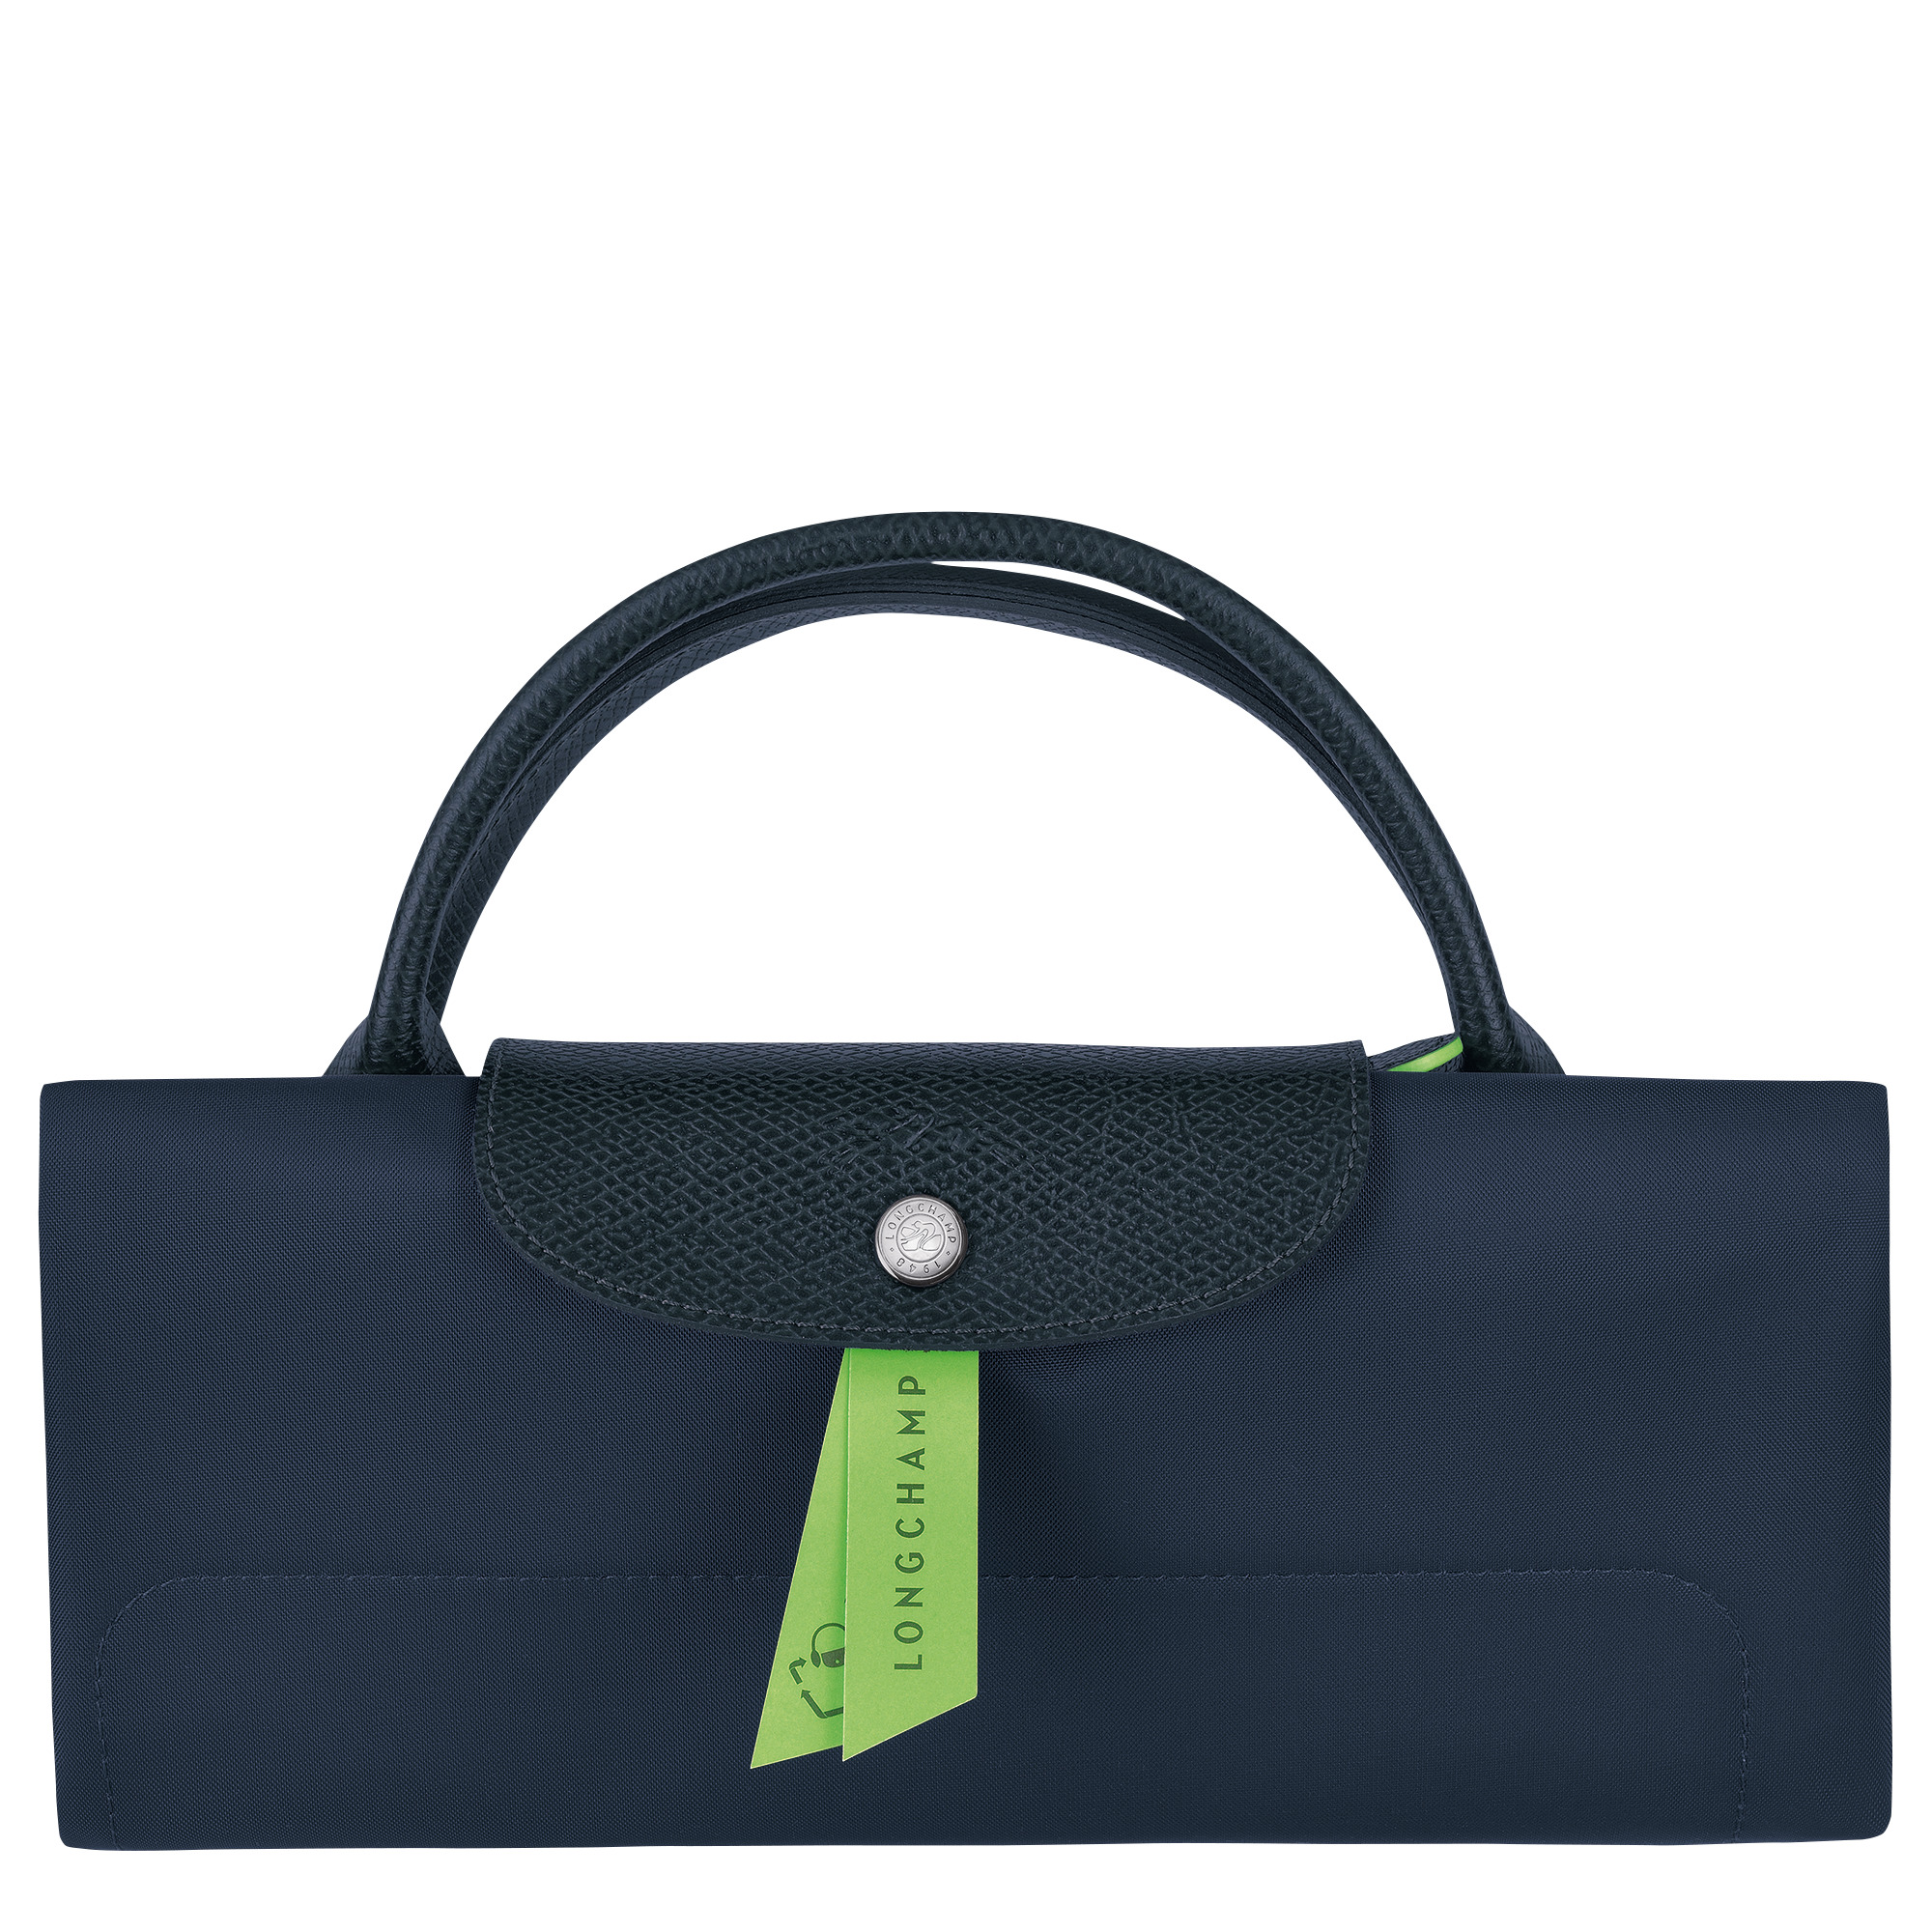 Le Pliage Green M Travel bag Navy - Recycled canvas - 5